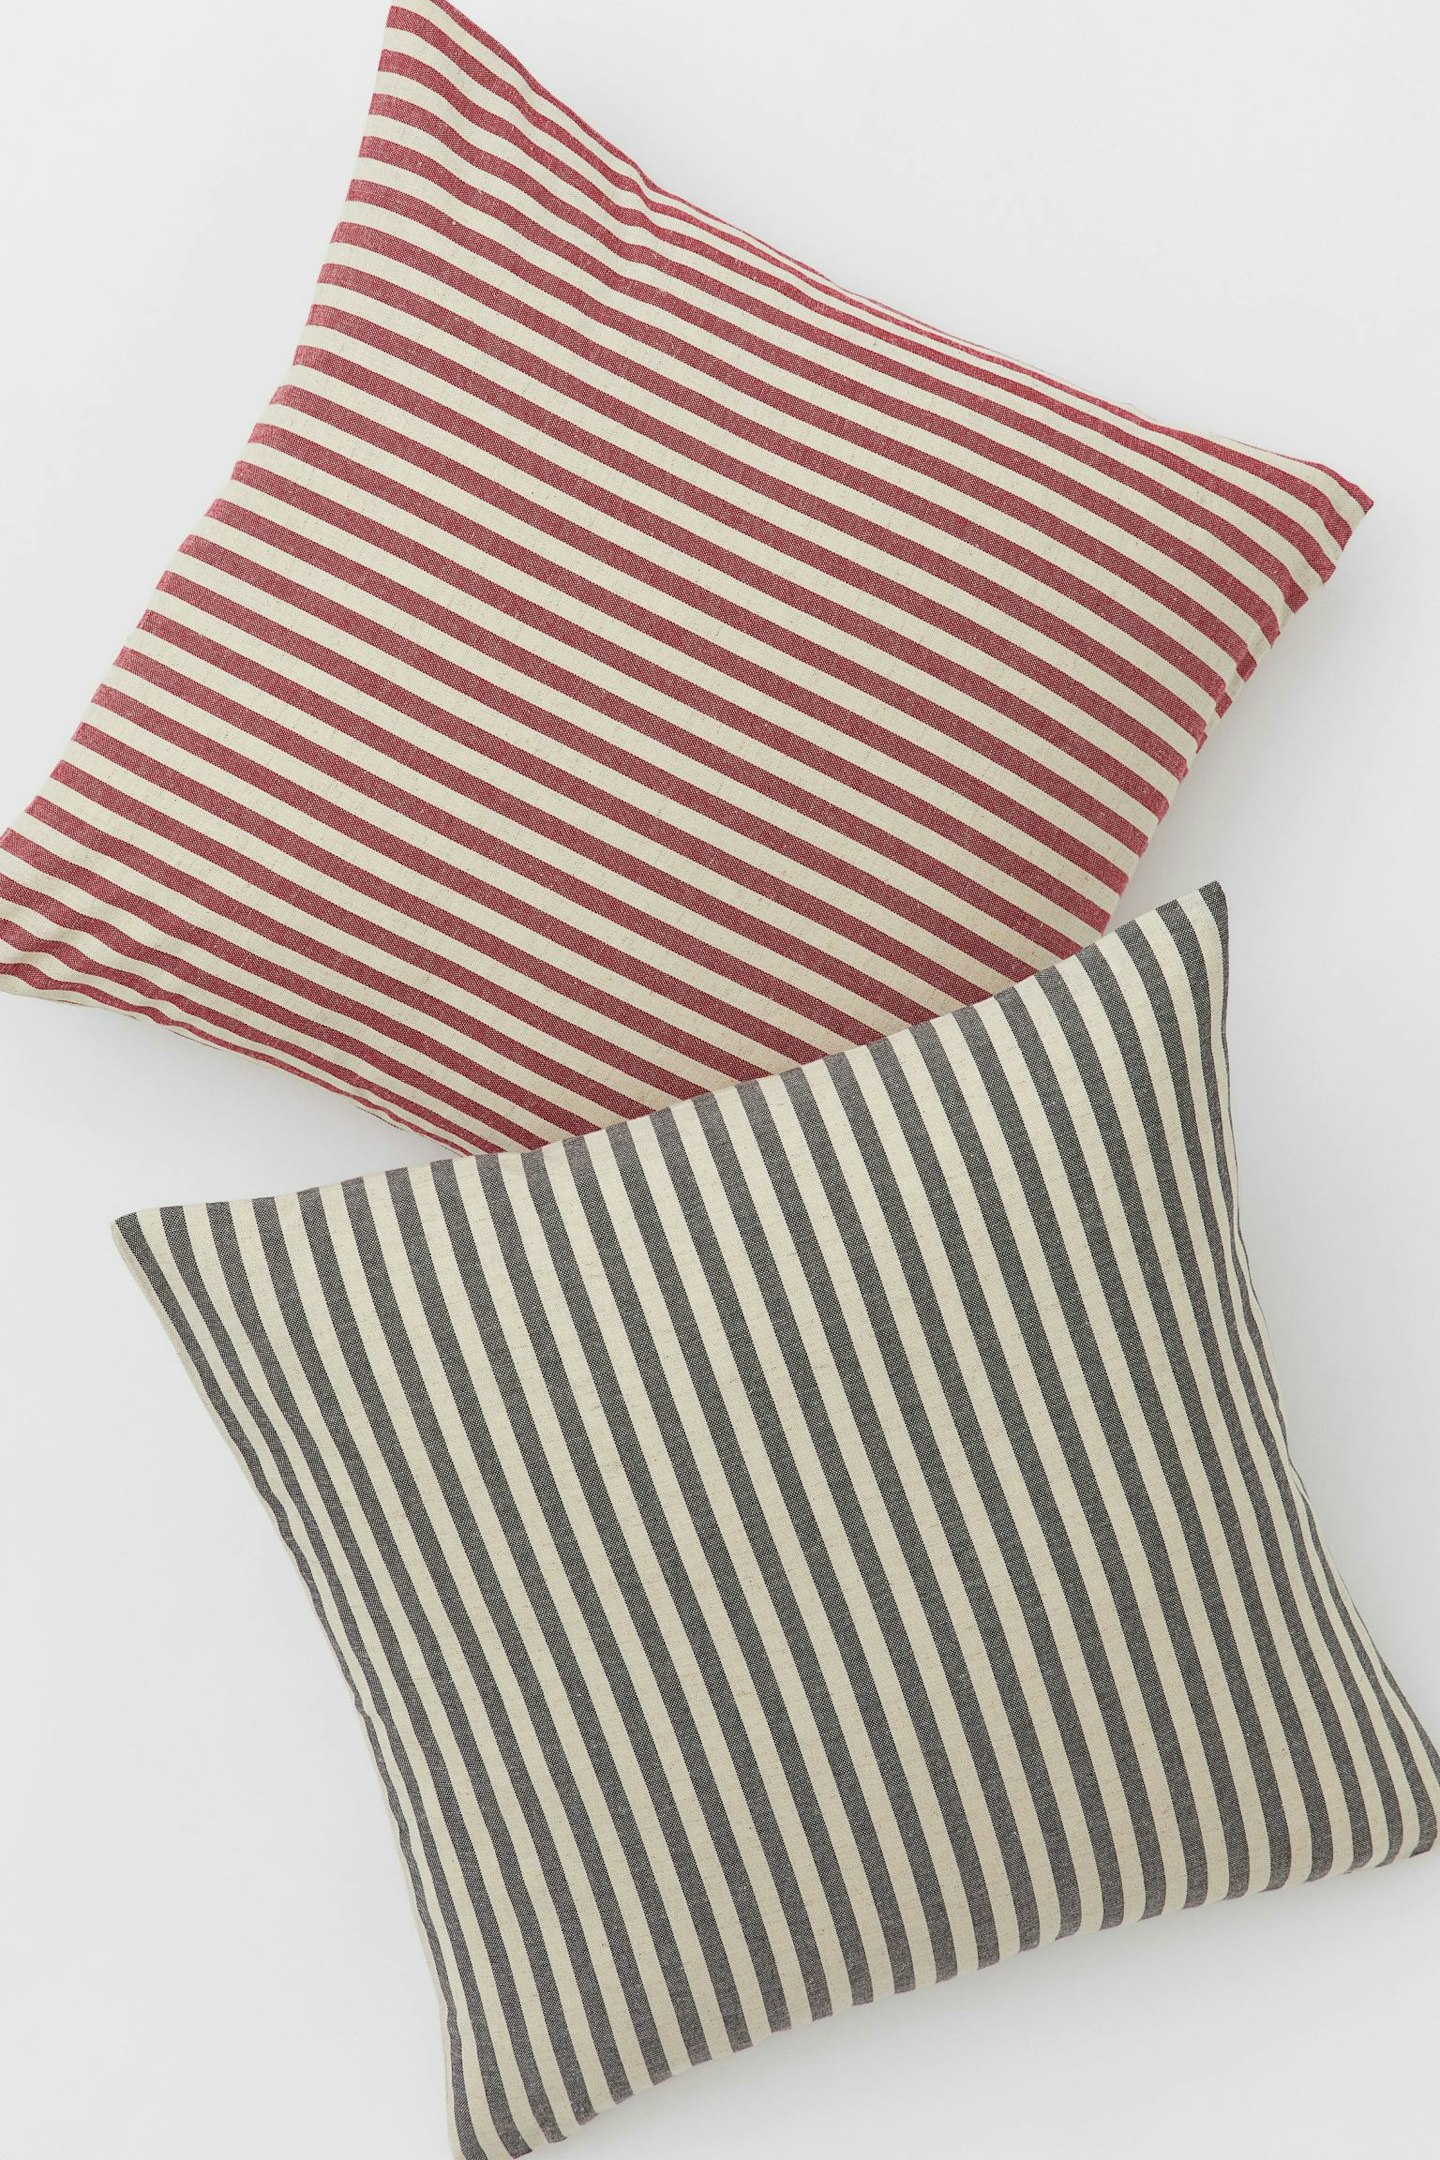 Lunchtime Shop Wednesady - H&M Home Linen Blend Cushion Cover, £8.99